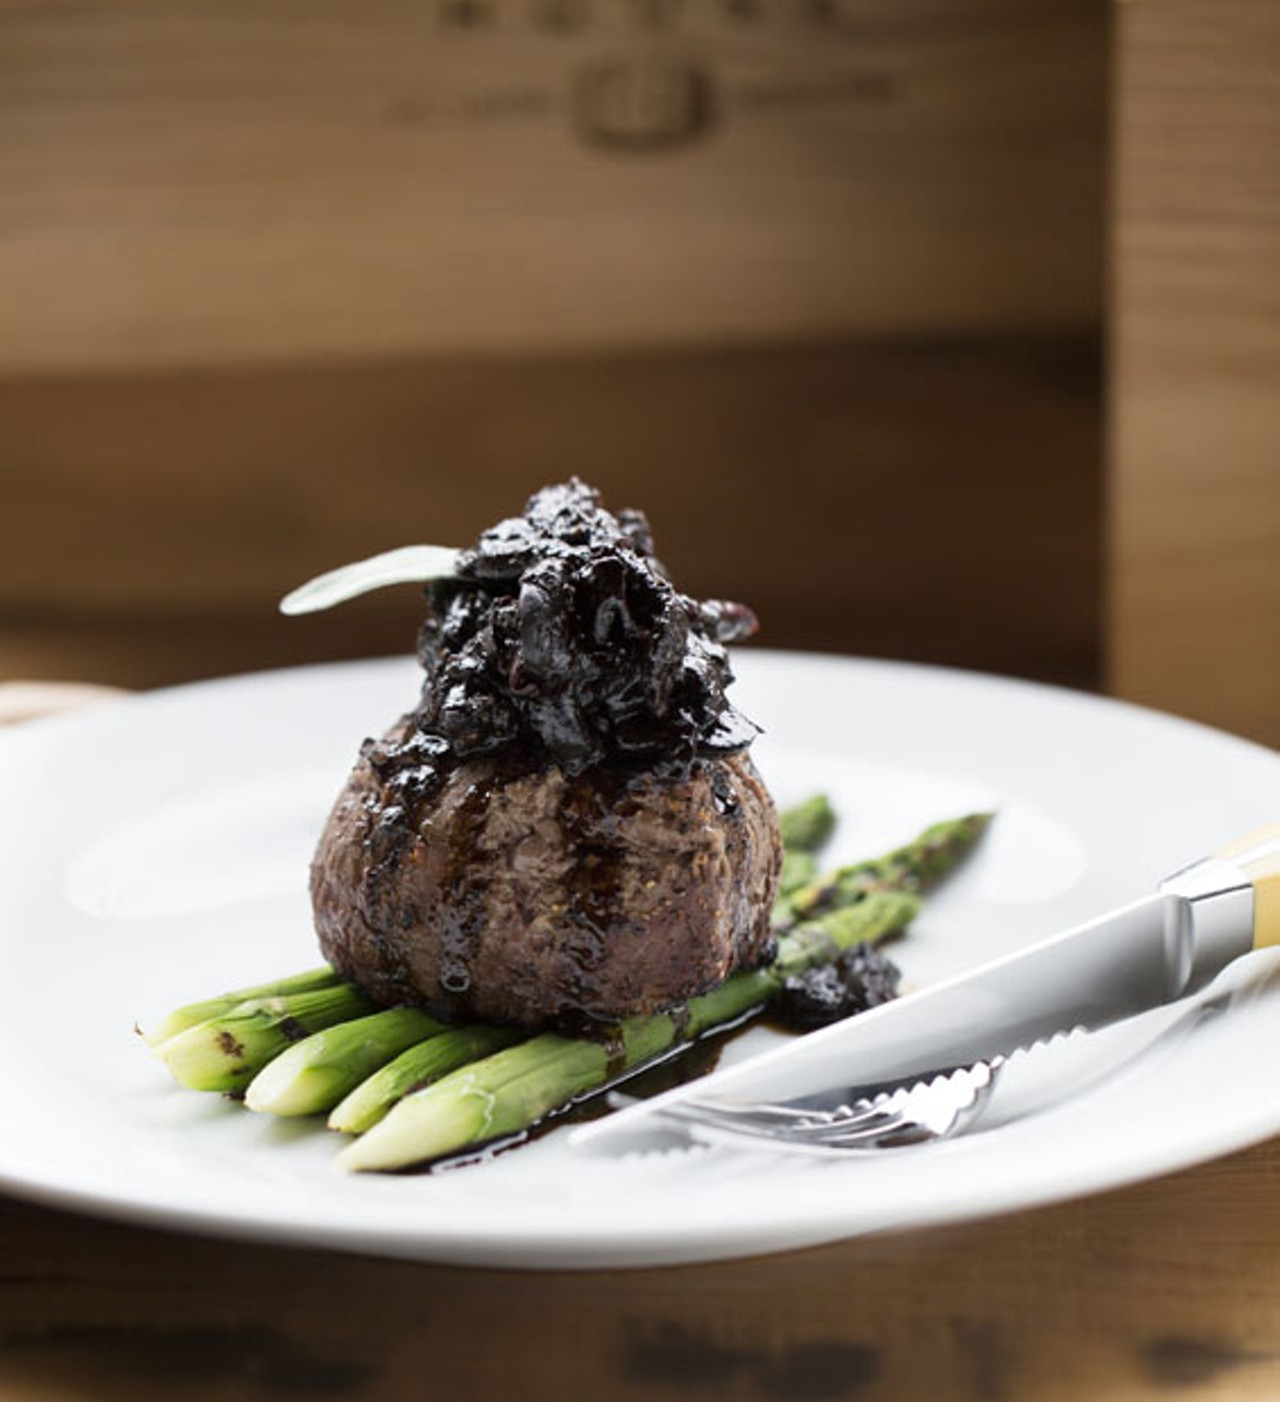 "Tete De Filet" is a grilled eight-ounce filet with balsamic sage glaze and wild mushrooms, served with grilled asparagus.